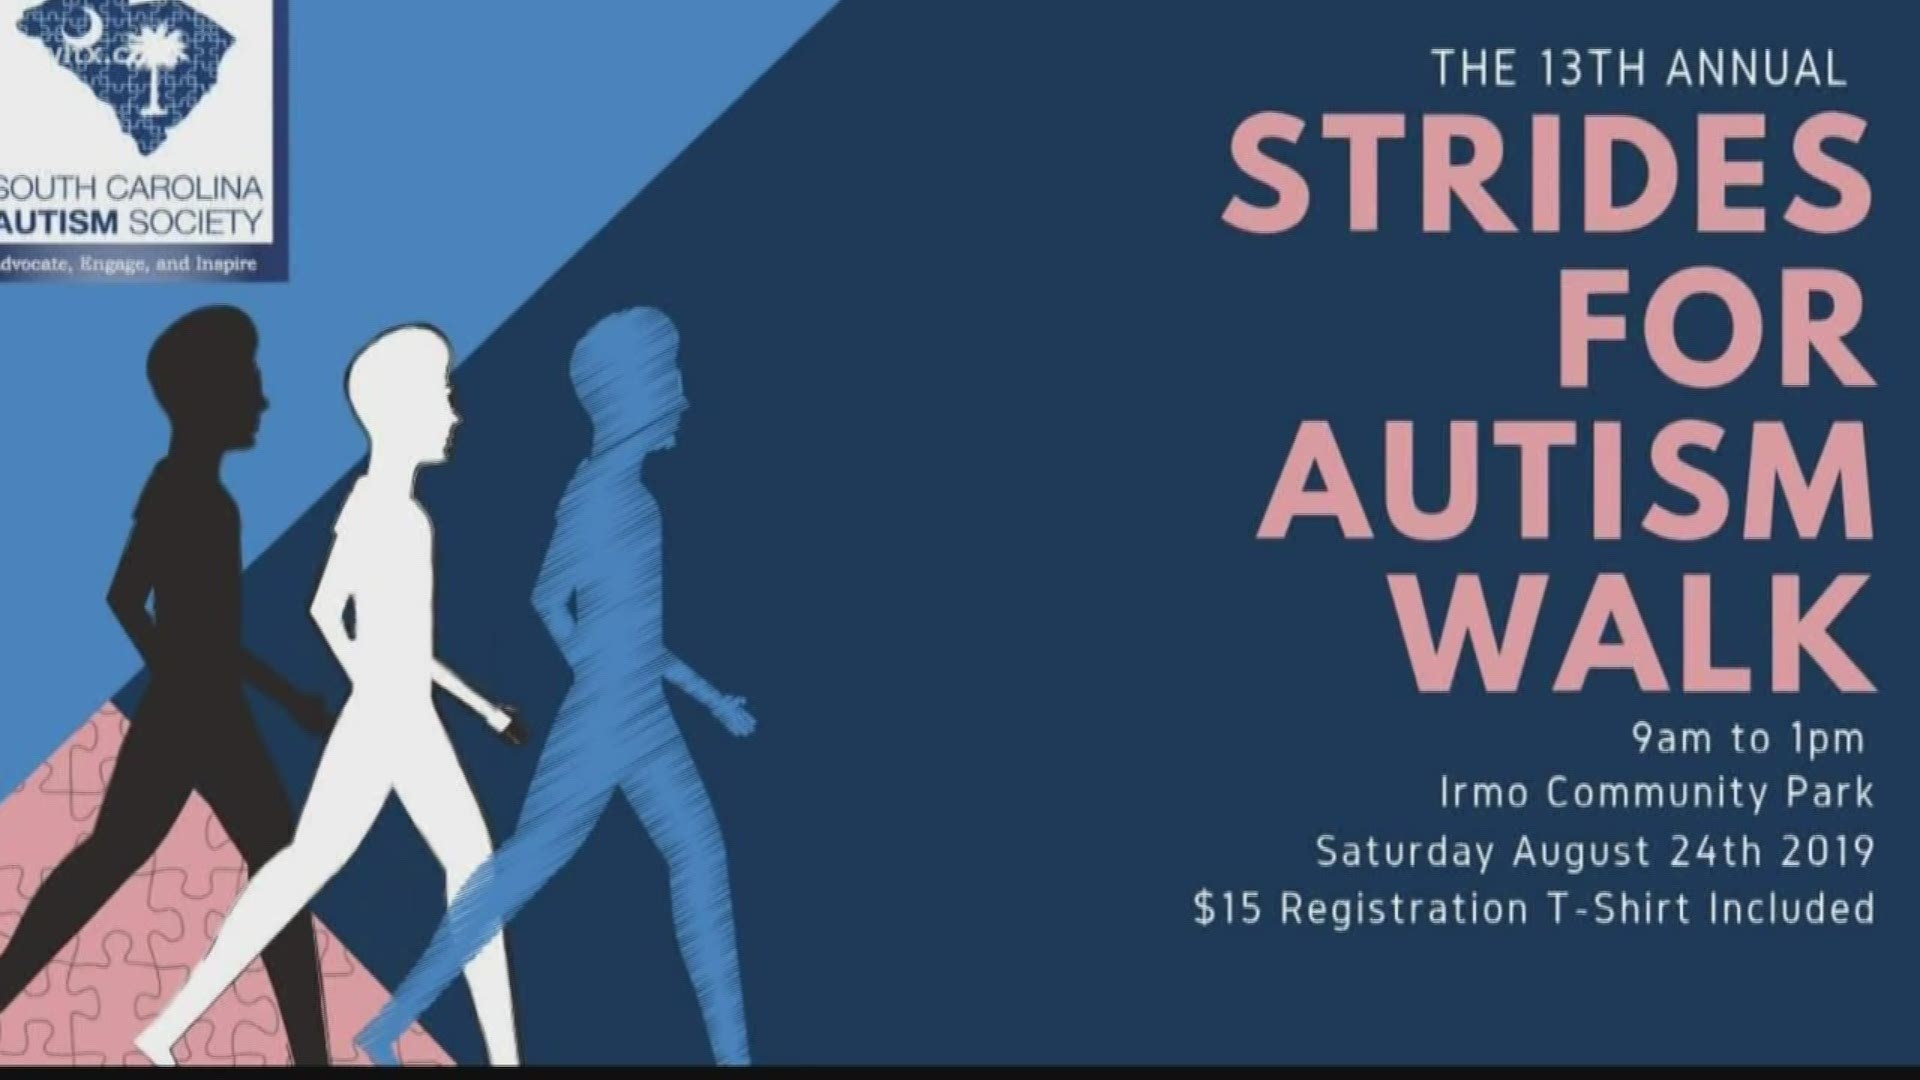 This will be the 13th annual Strides for Autism Walk